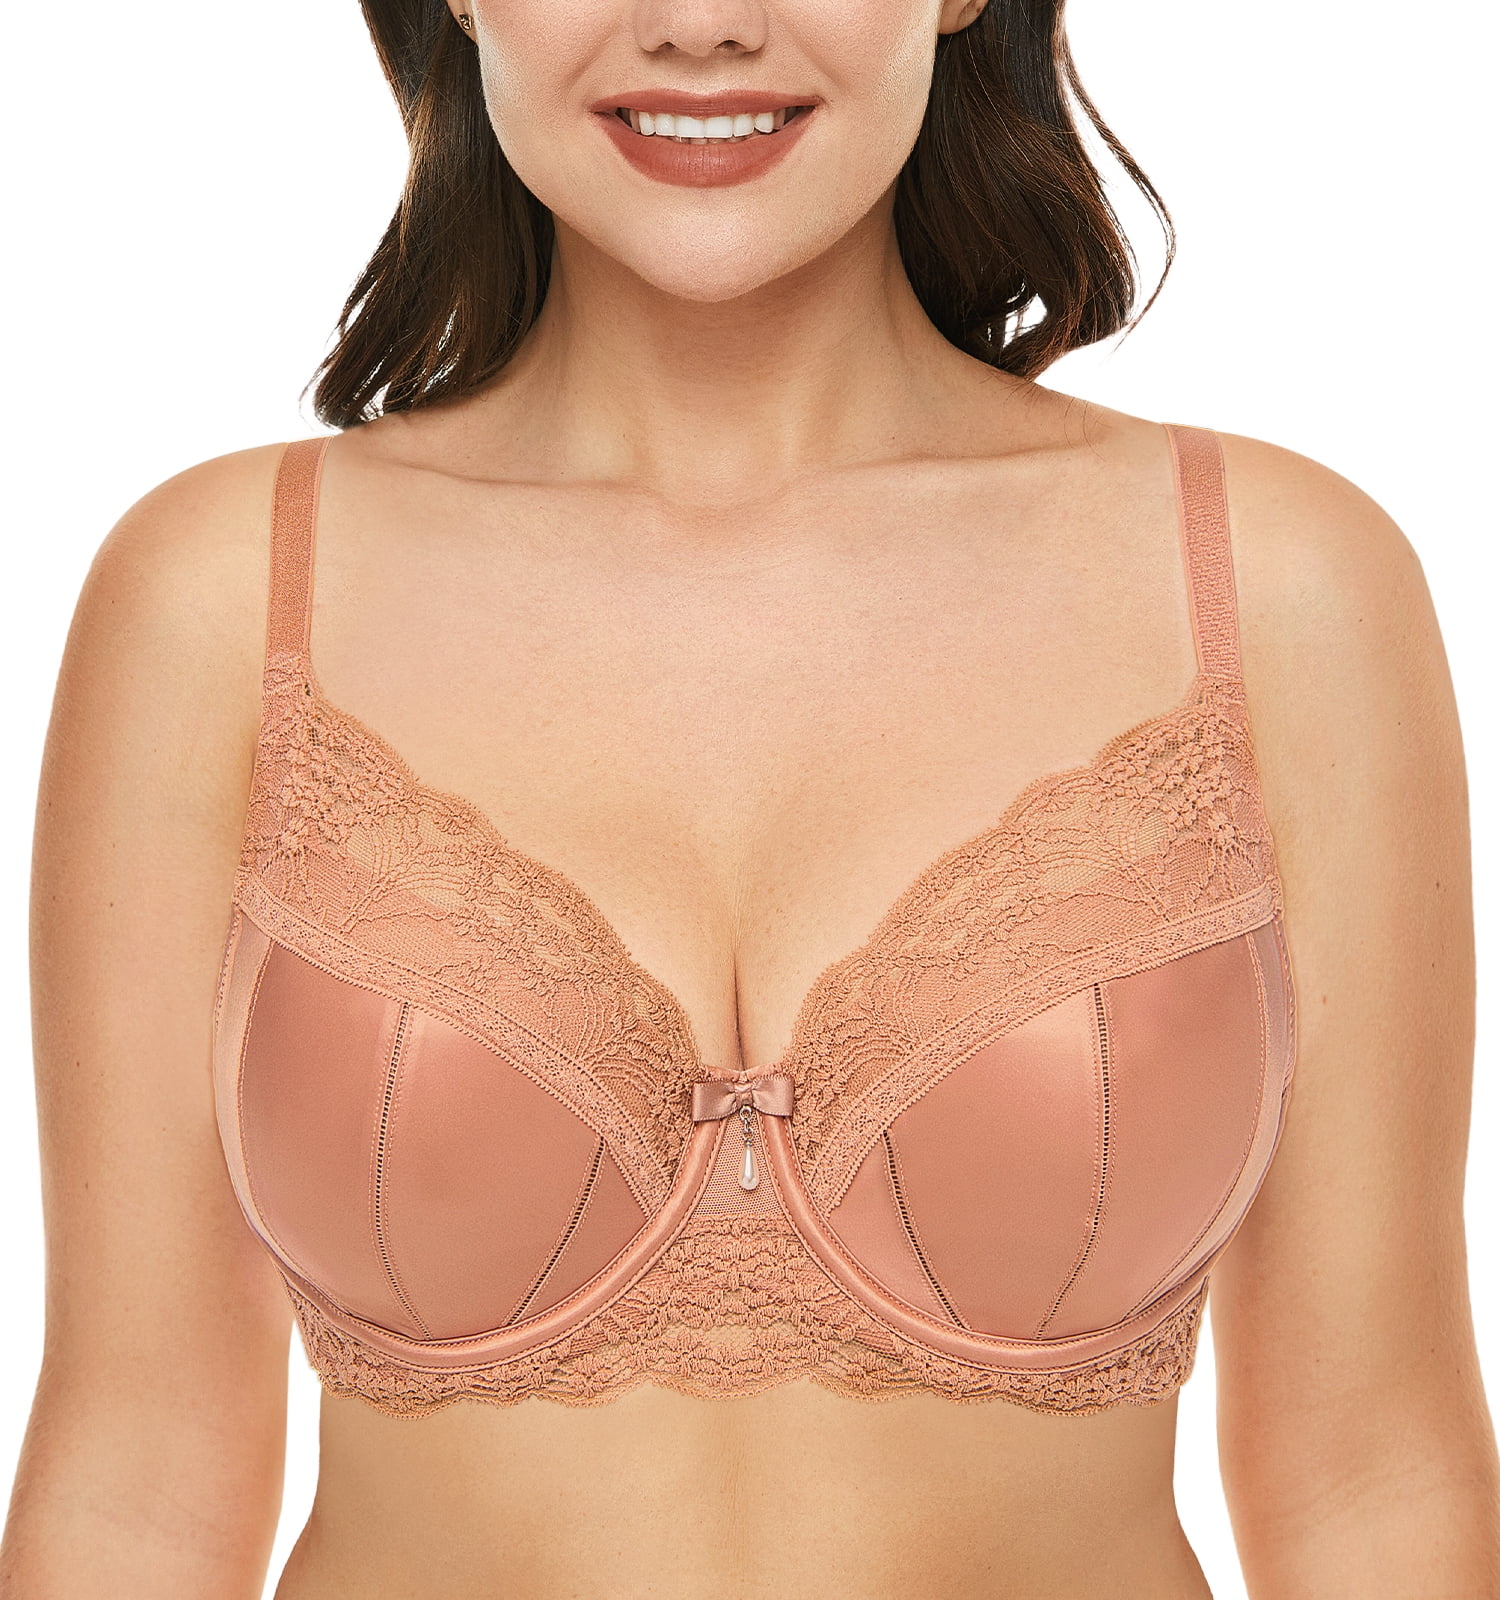 Wingslove Women's Full Coverage Bra Sexy Lace Underwire Push up